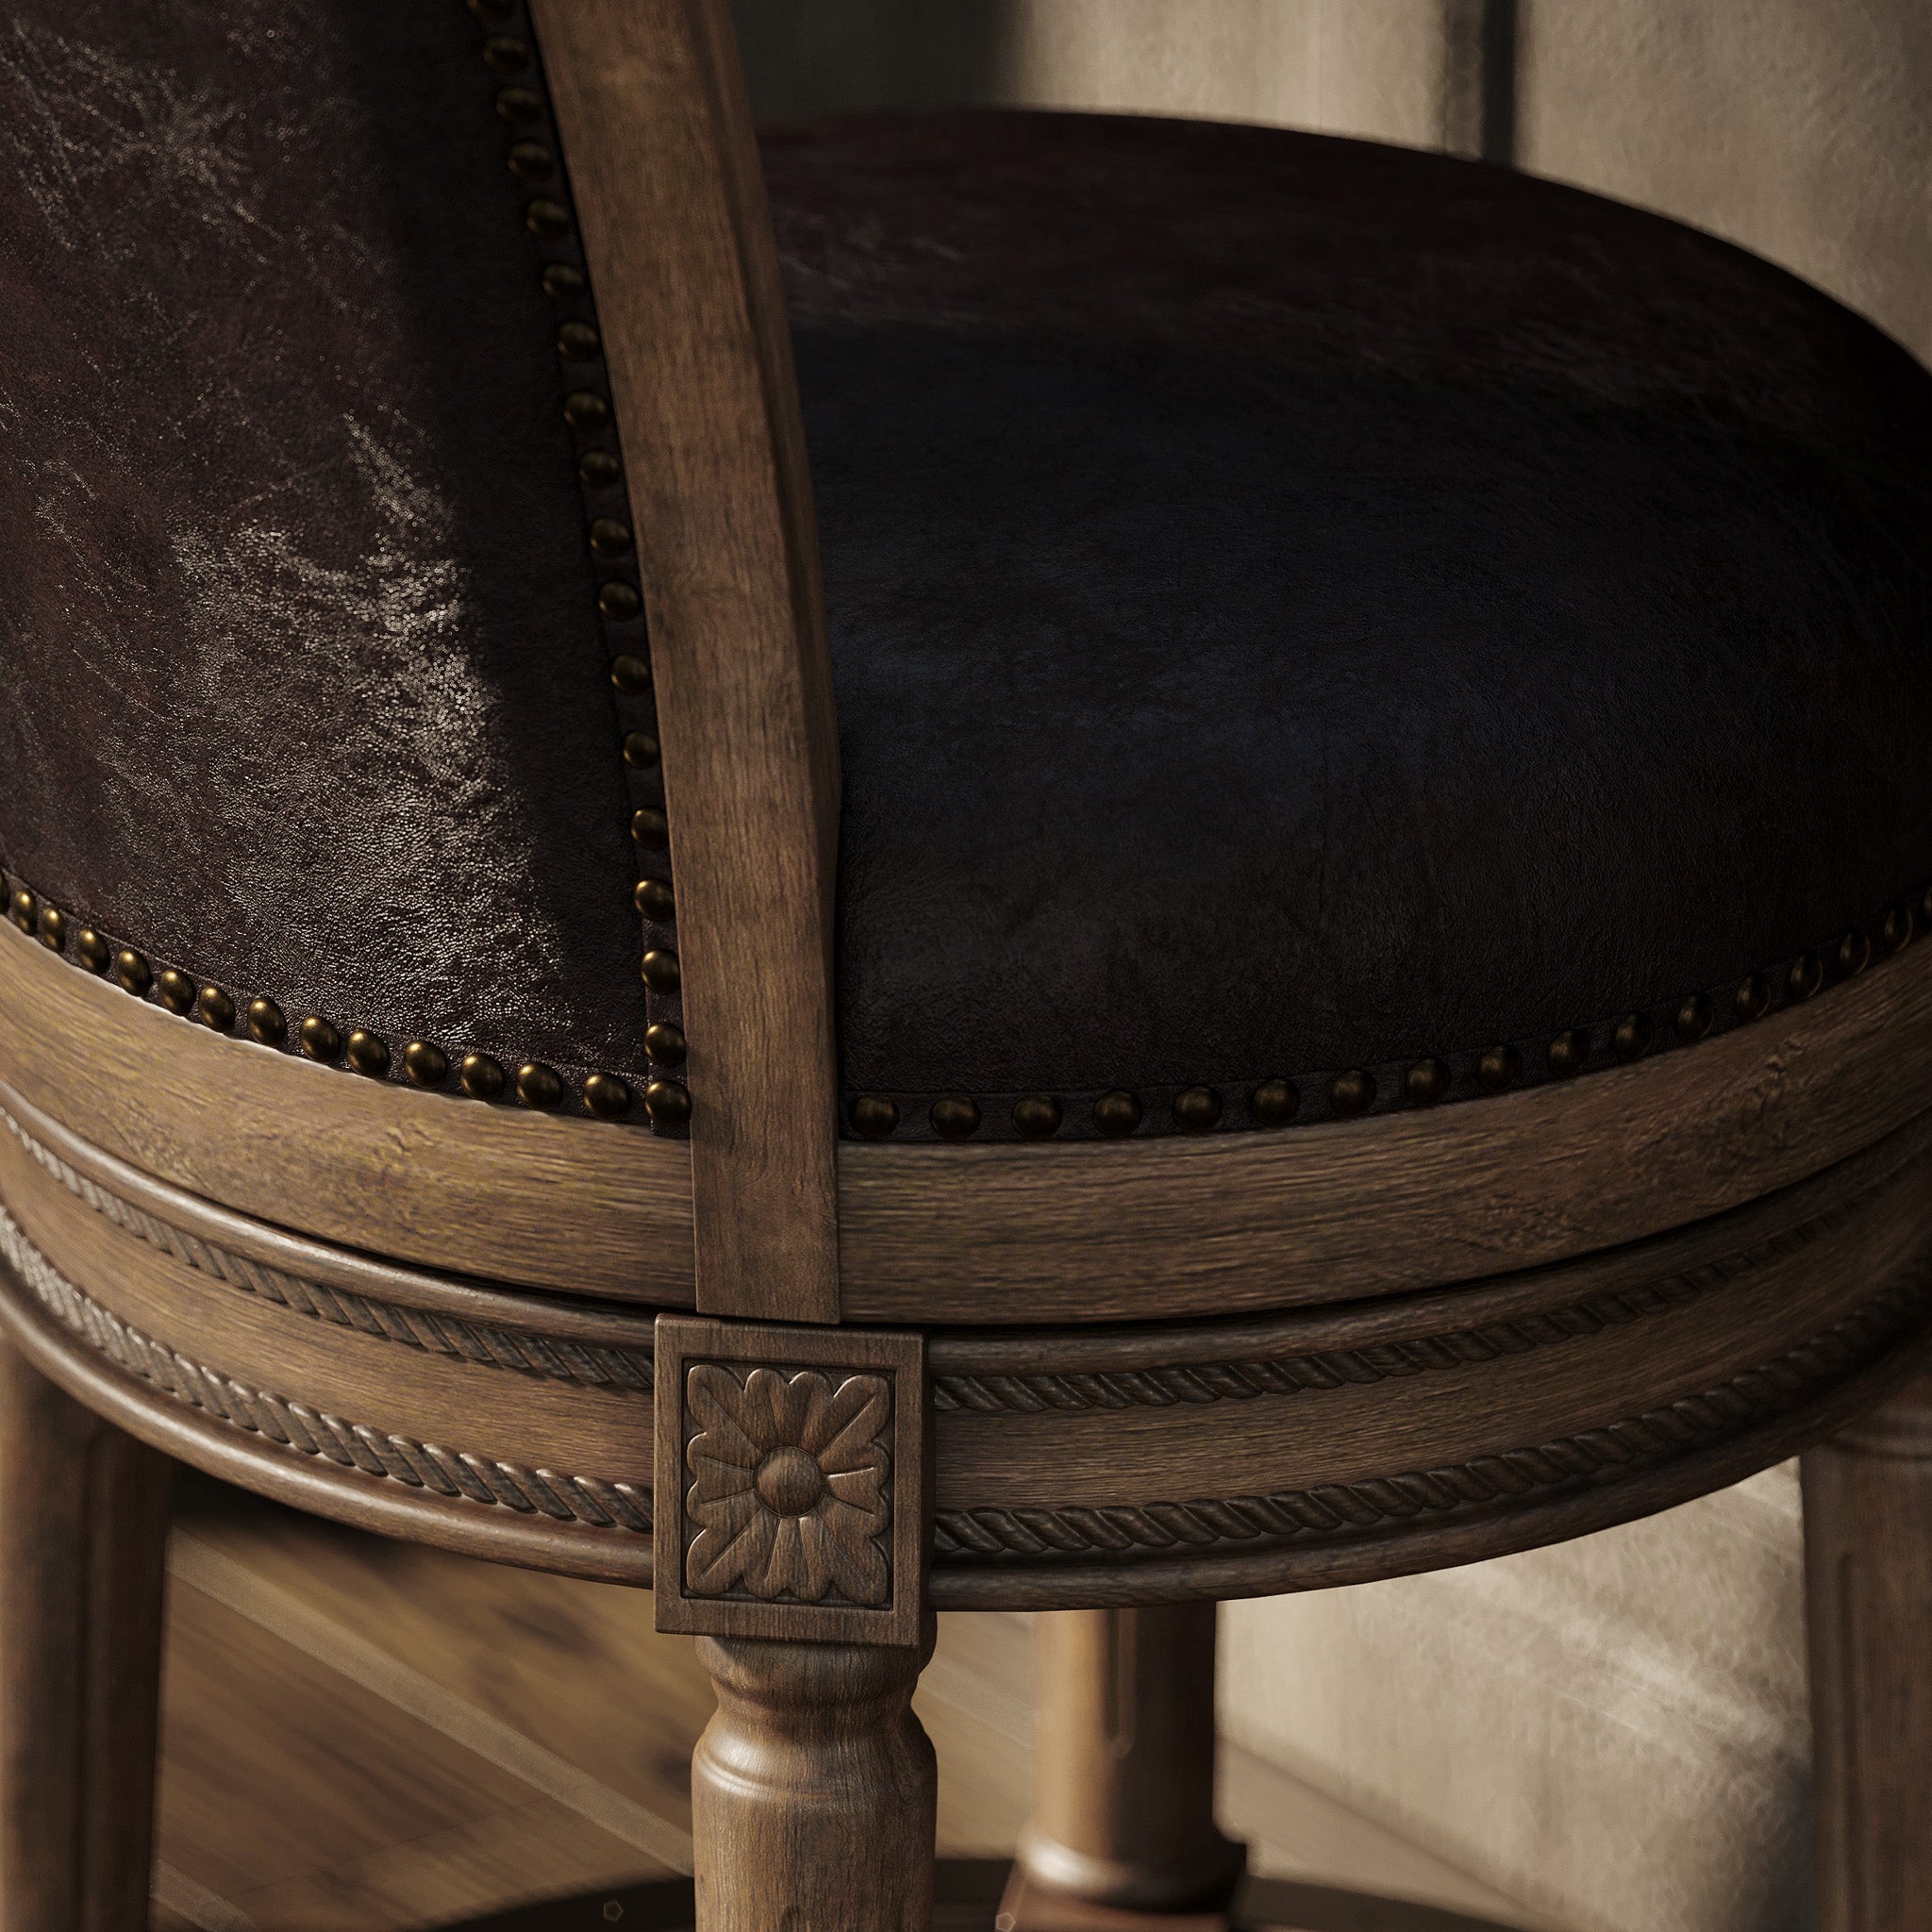 Pullman Bar Stool in Walnut Finish with Marksman Saddle Vegan Leather in Stools by Maven Lane